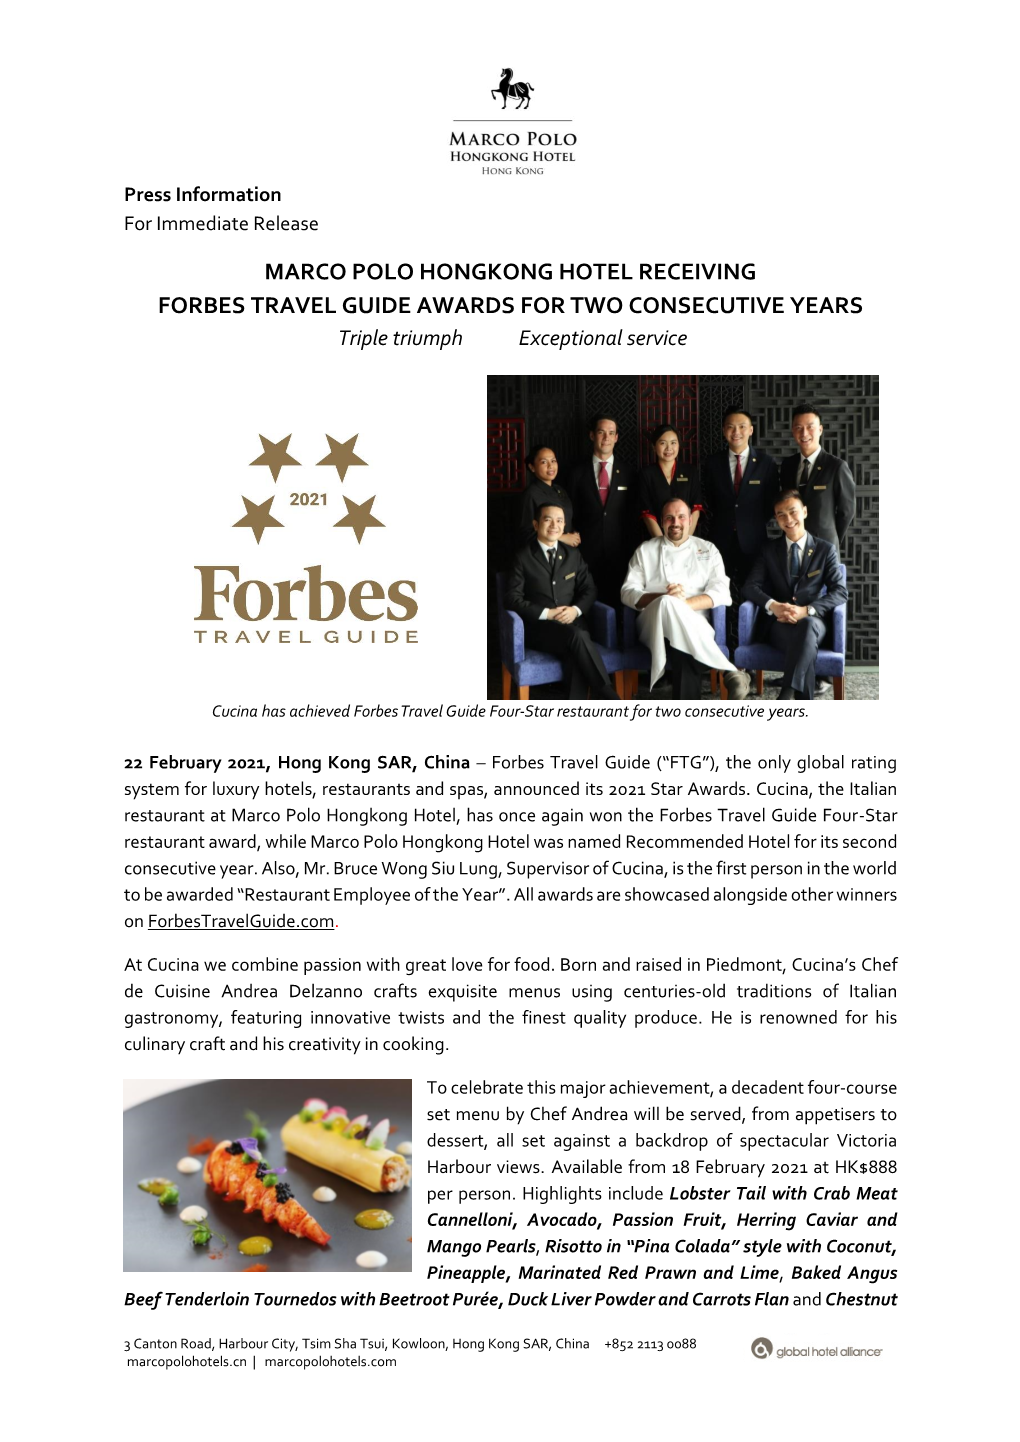 MARCO POLO HONGKONG HOTEL RECEIVING FORBES TRAVEL GUIDE AWARDS for TWO CONSECUTIVE YEARS Triple Triumph Exceptional Service